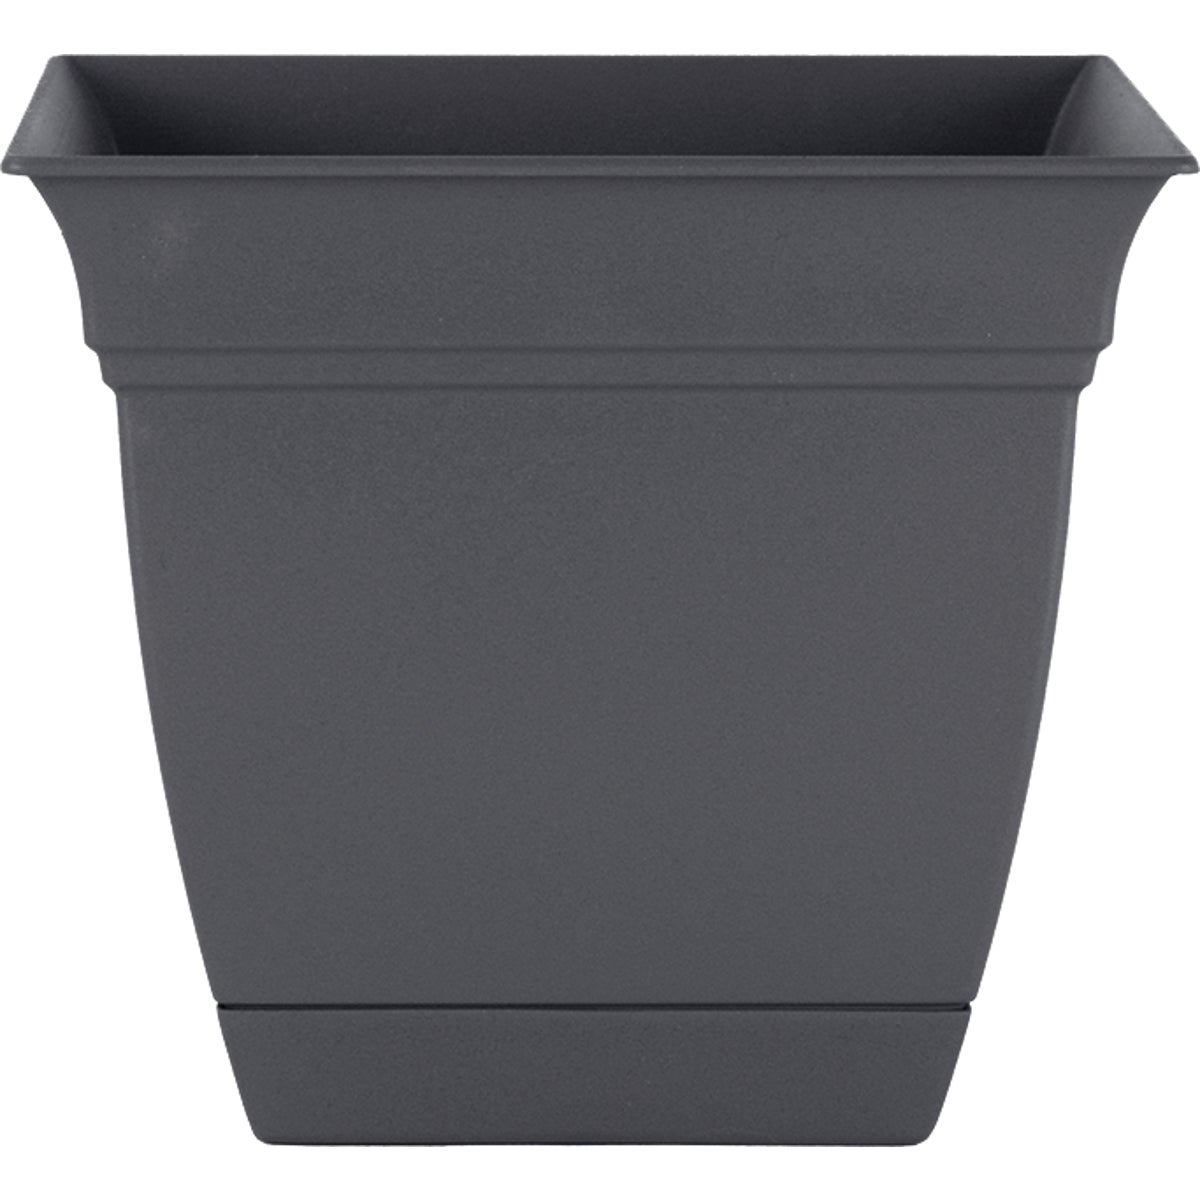 HC Companies Eclipse 12 In. x 12 In. x 10.50 In. Resin Warm Gray Planter